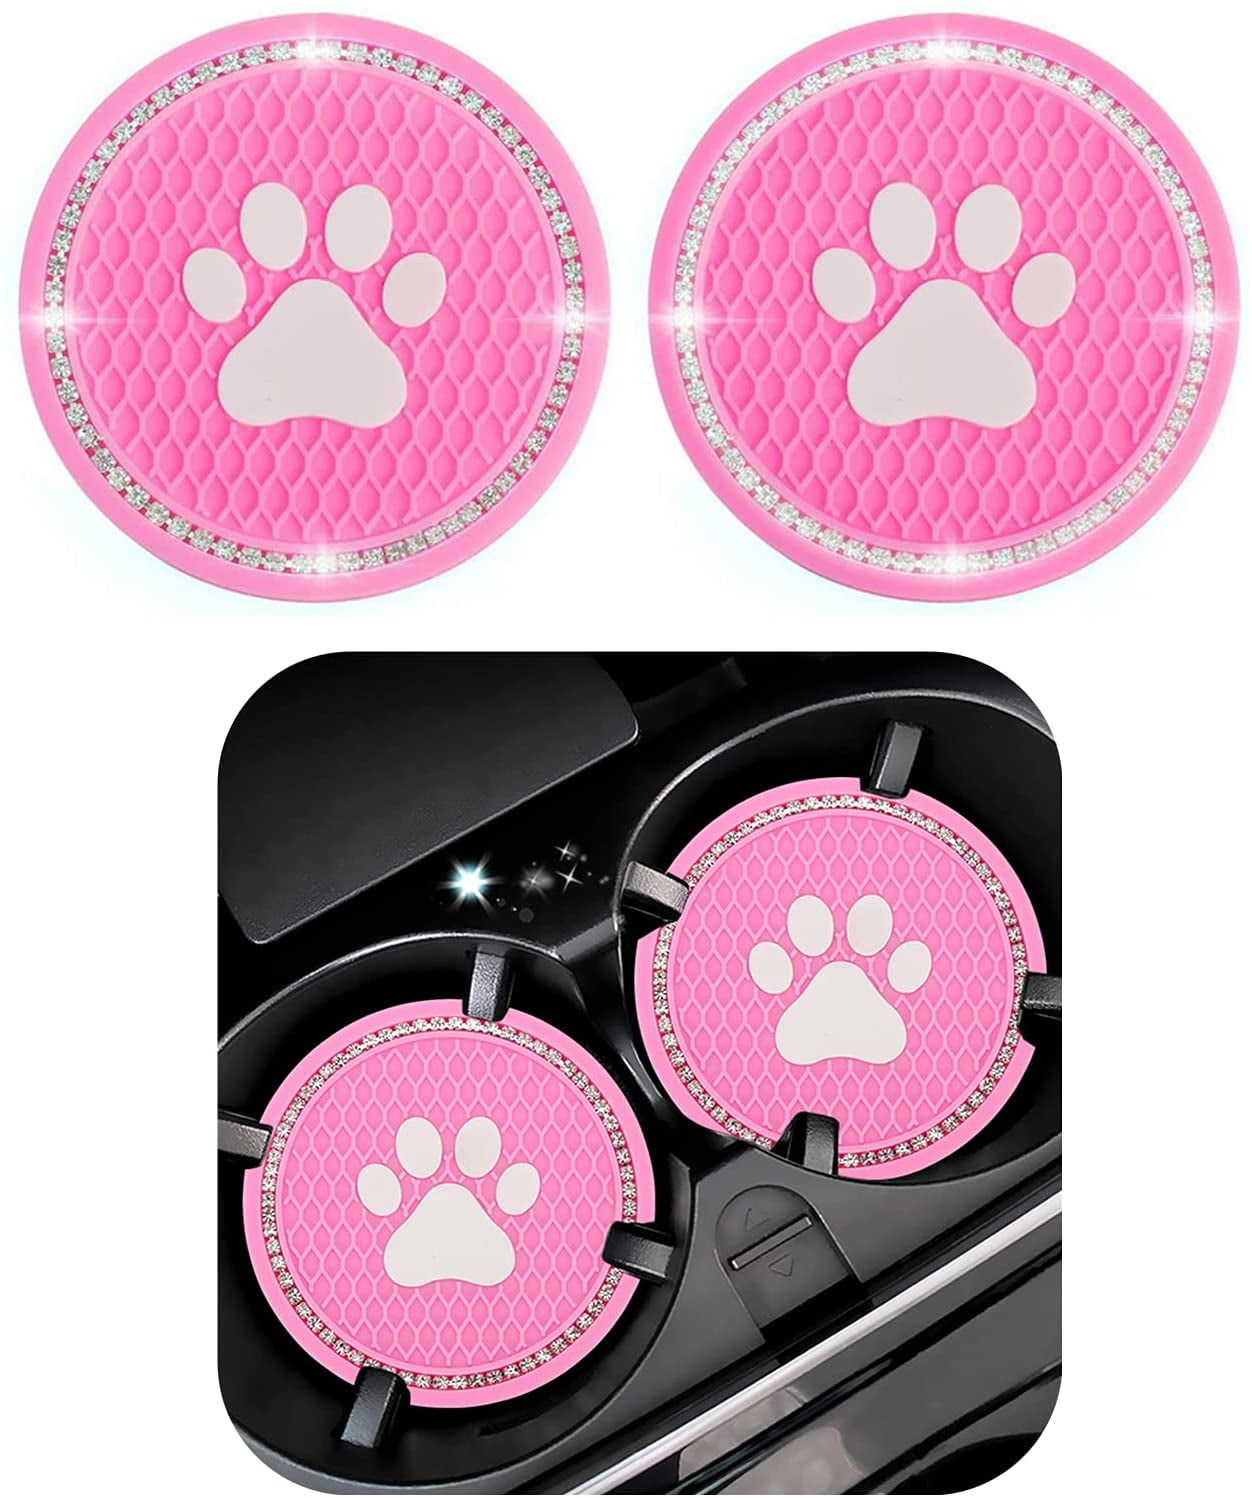 Anti Slip Universal Insert Car Cup Holder Coaster Suitable for Women Car Cup Coasters 2.75 in Removable Car Coasters for Cup Holders Party Birthday 2 Pcs Bling Car Coasters for Women 